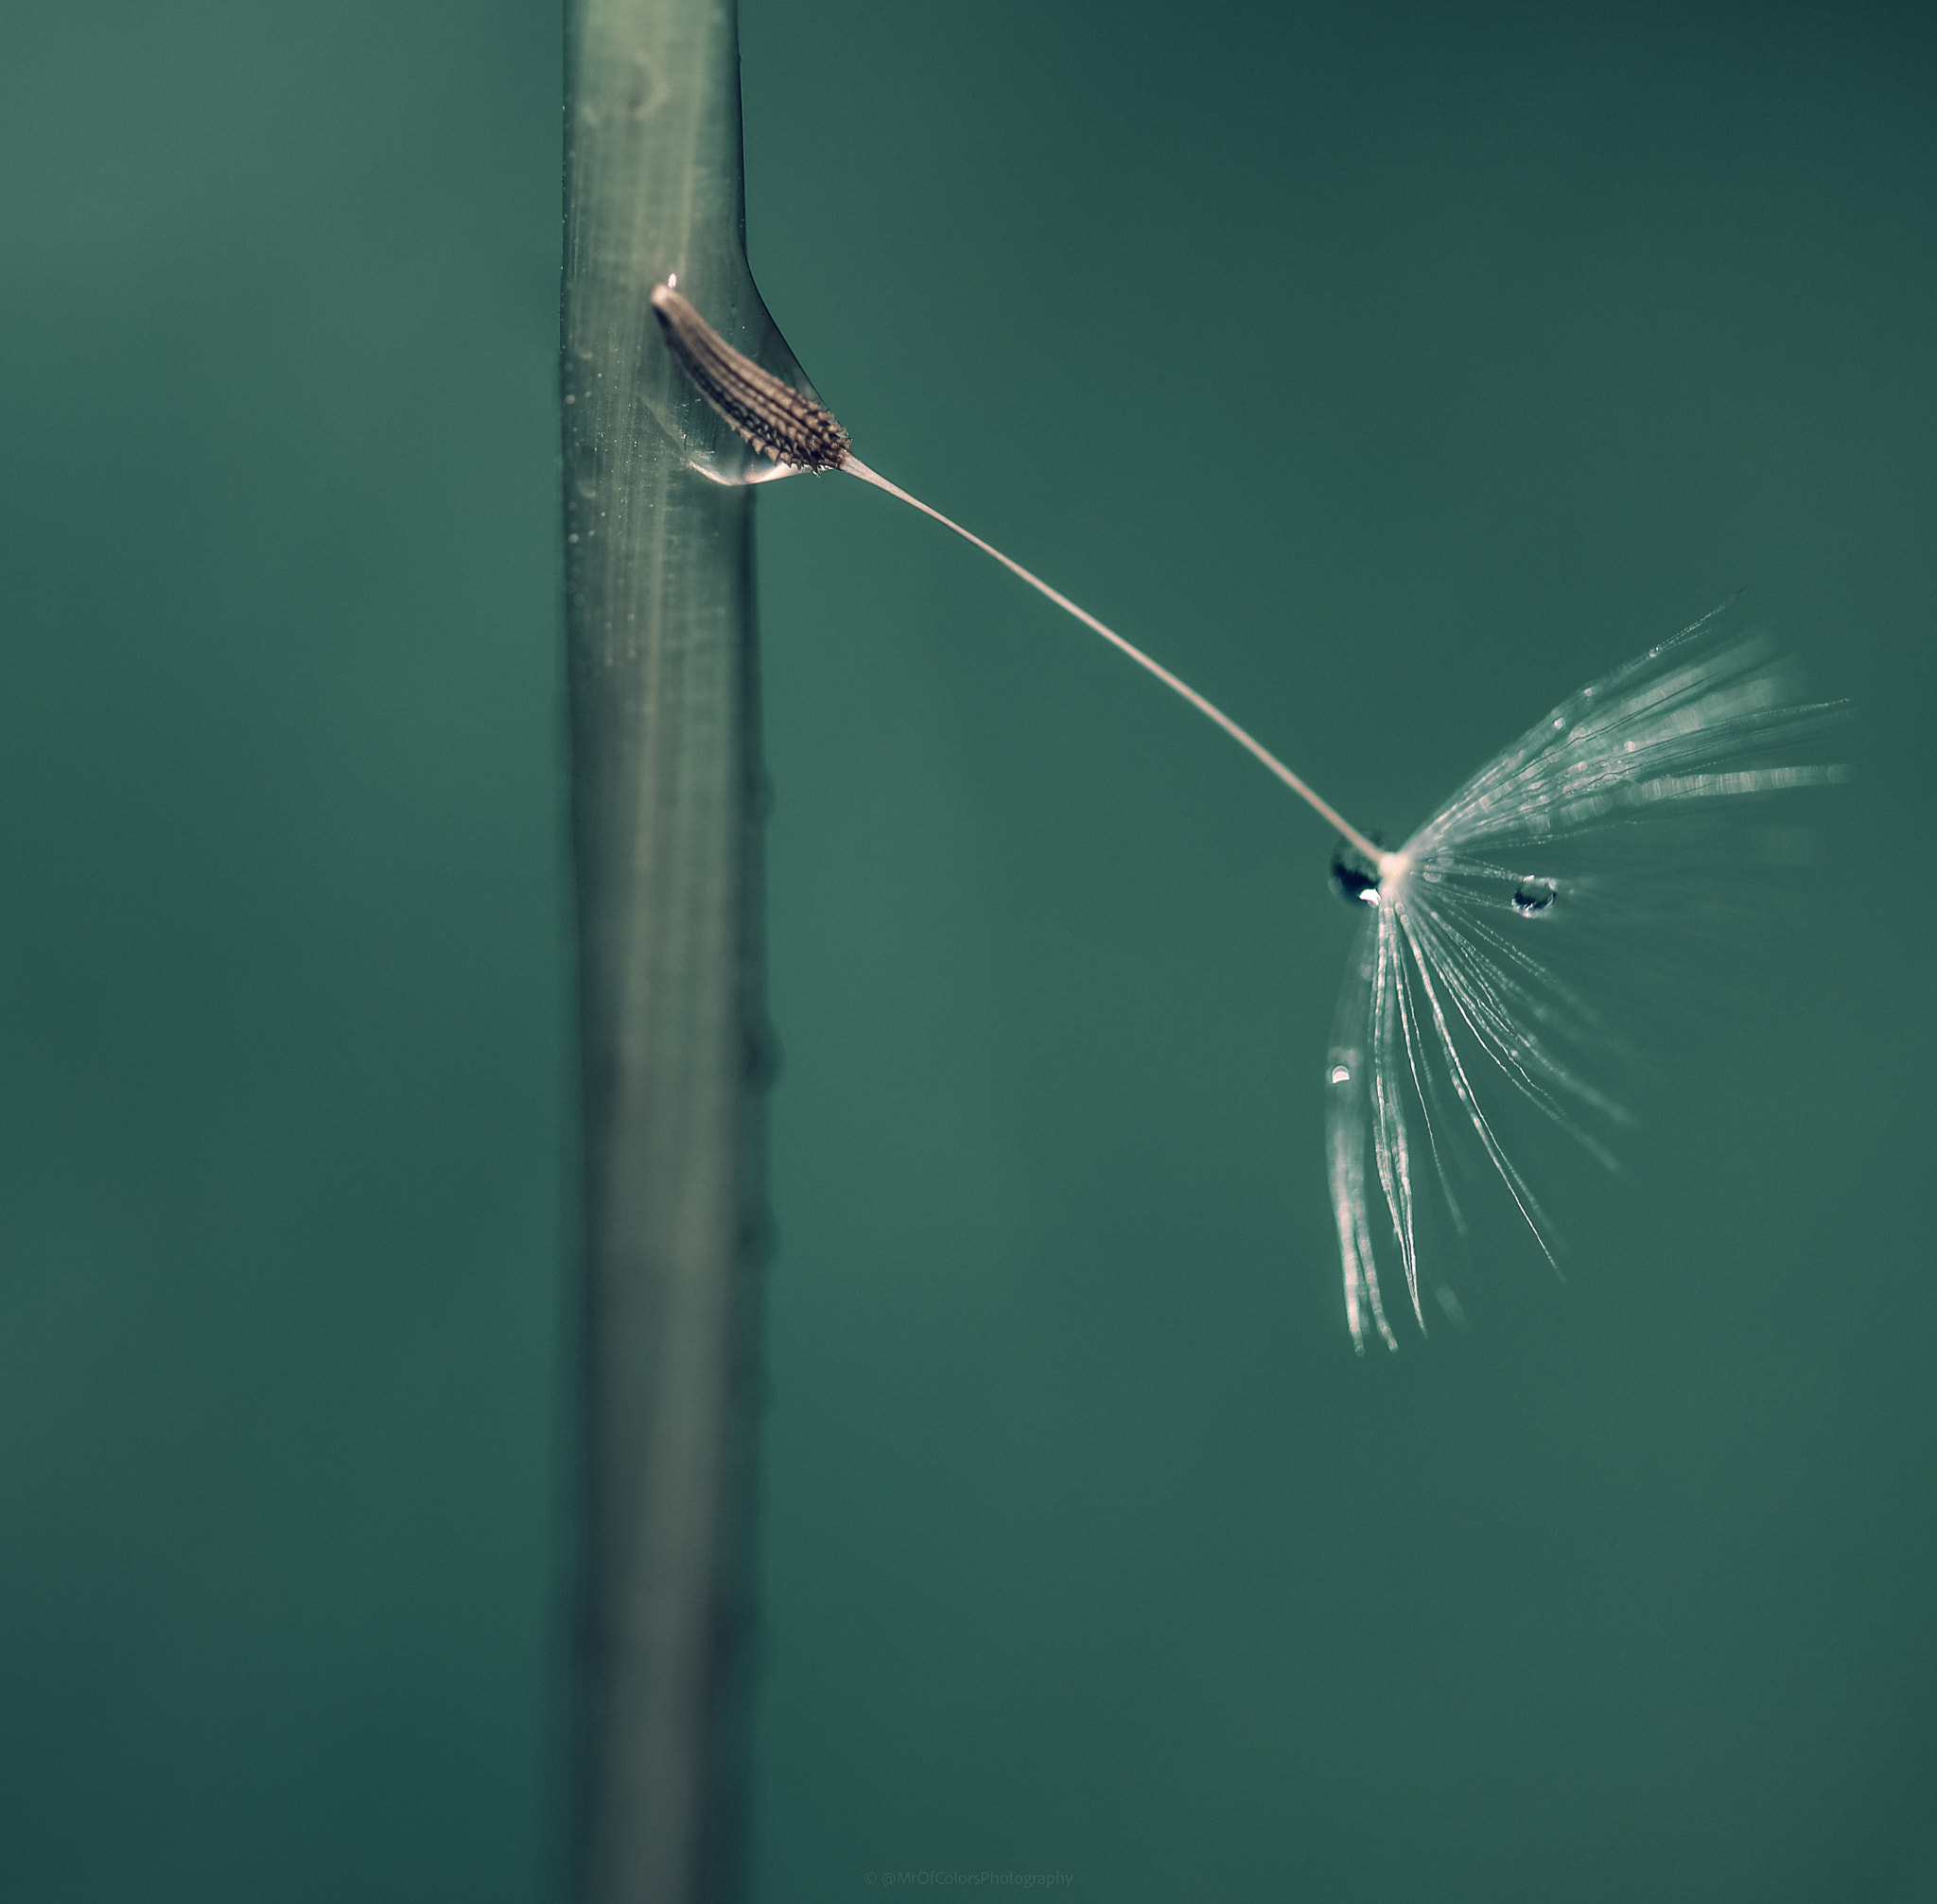 Holding On To A Drop (02-05-2022) #MacroByColors by DillenvanderMolen